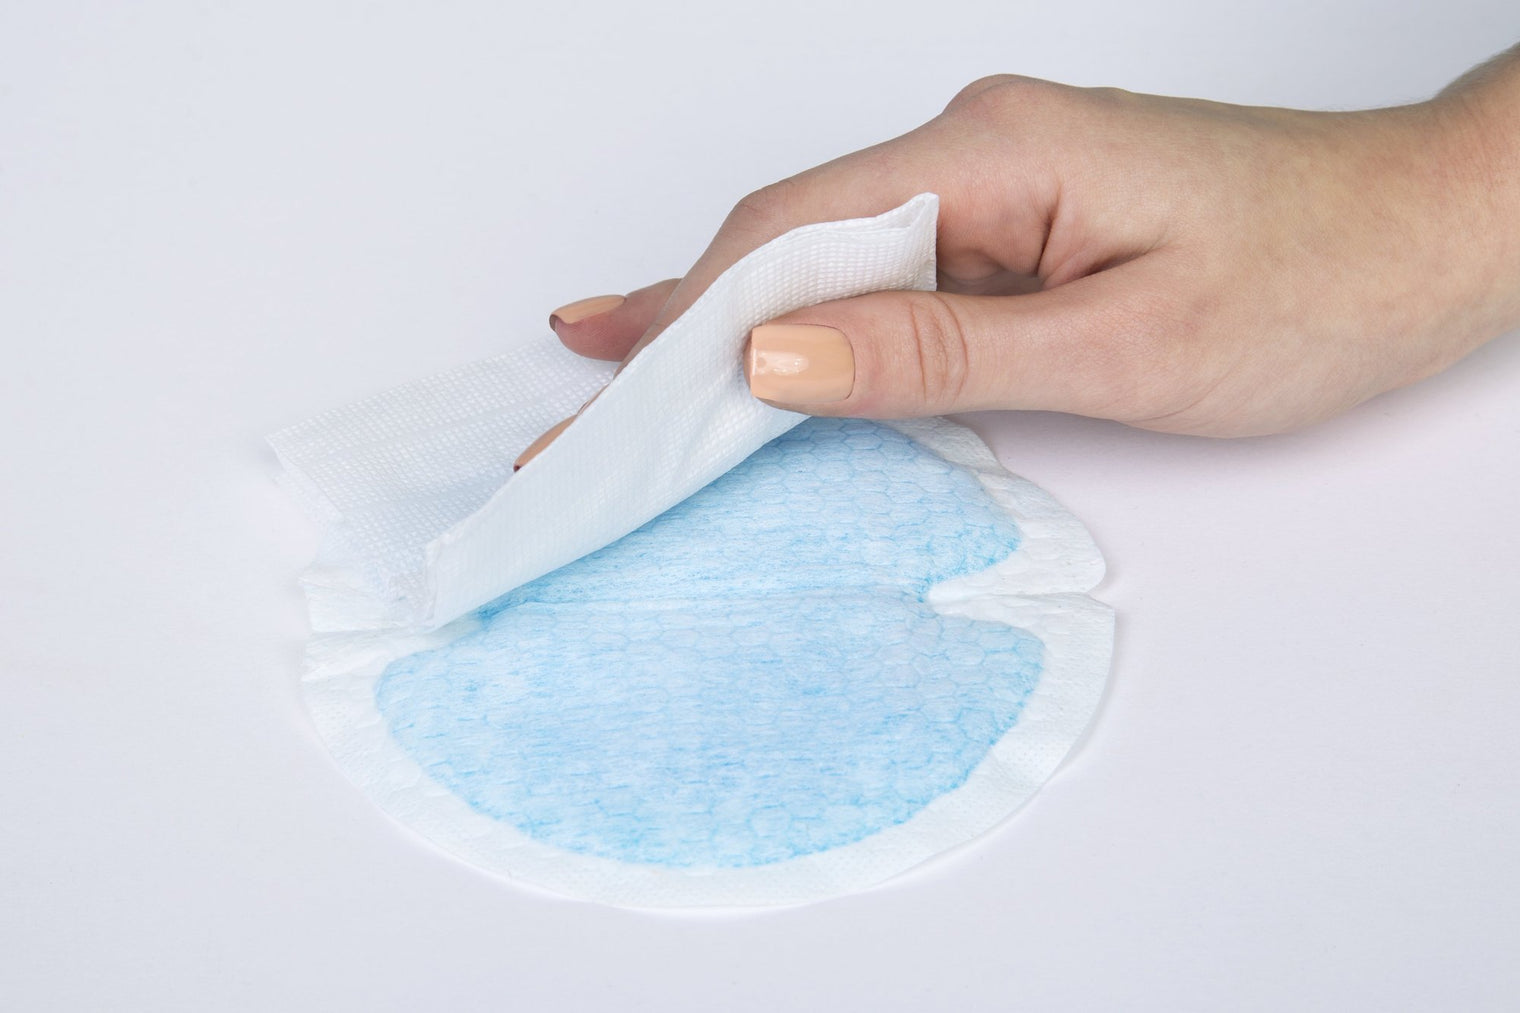 Disposable Nursing Pads - NatureBond. All rights reserved